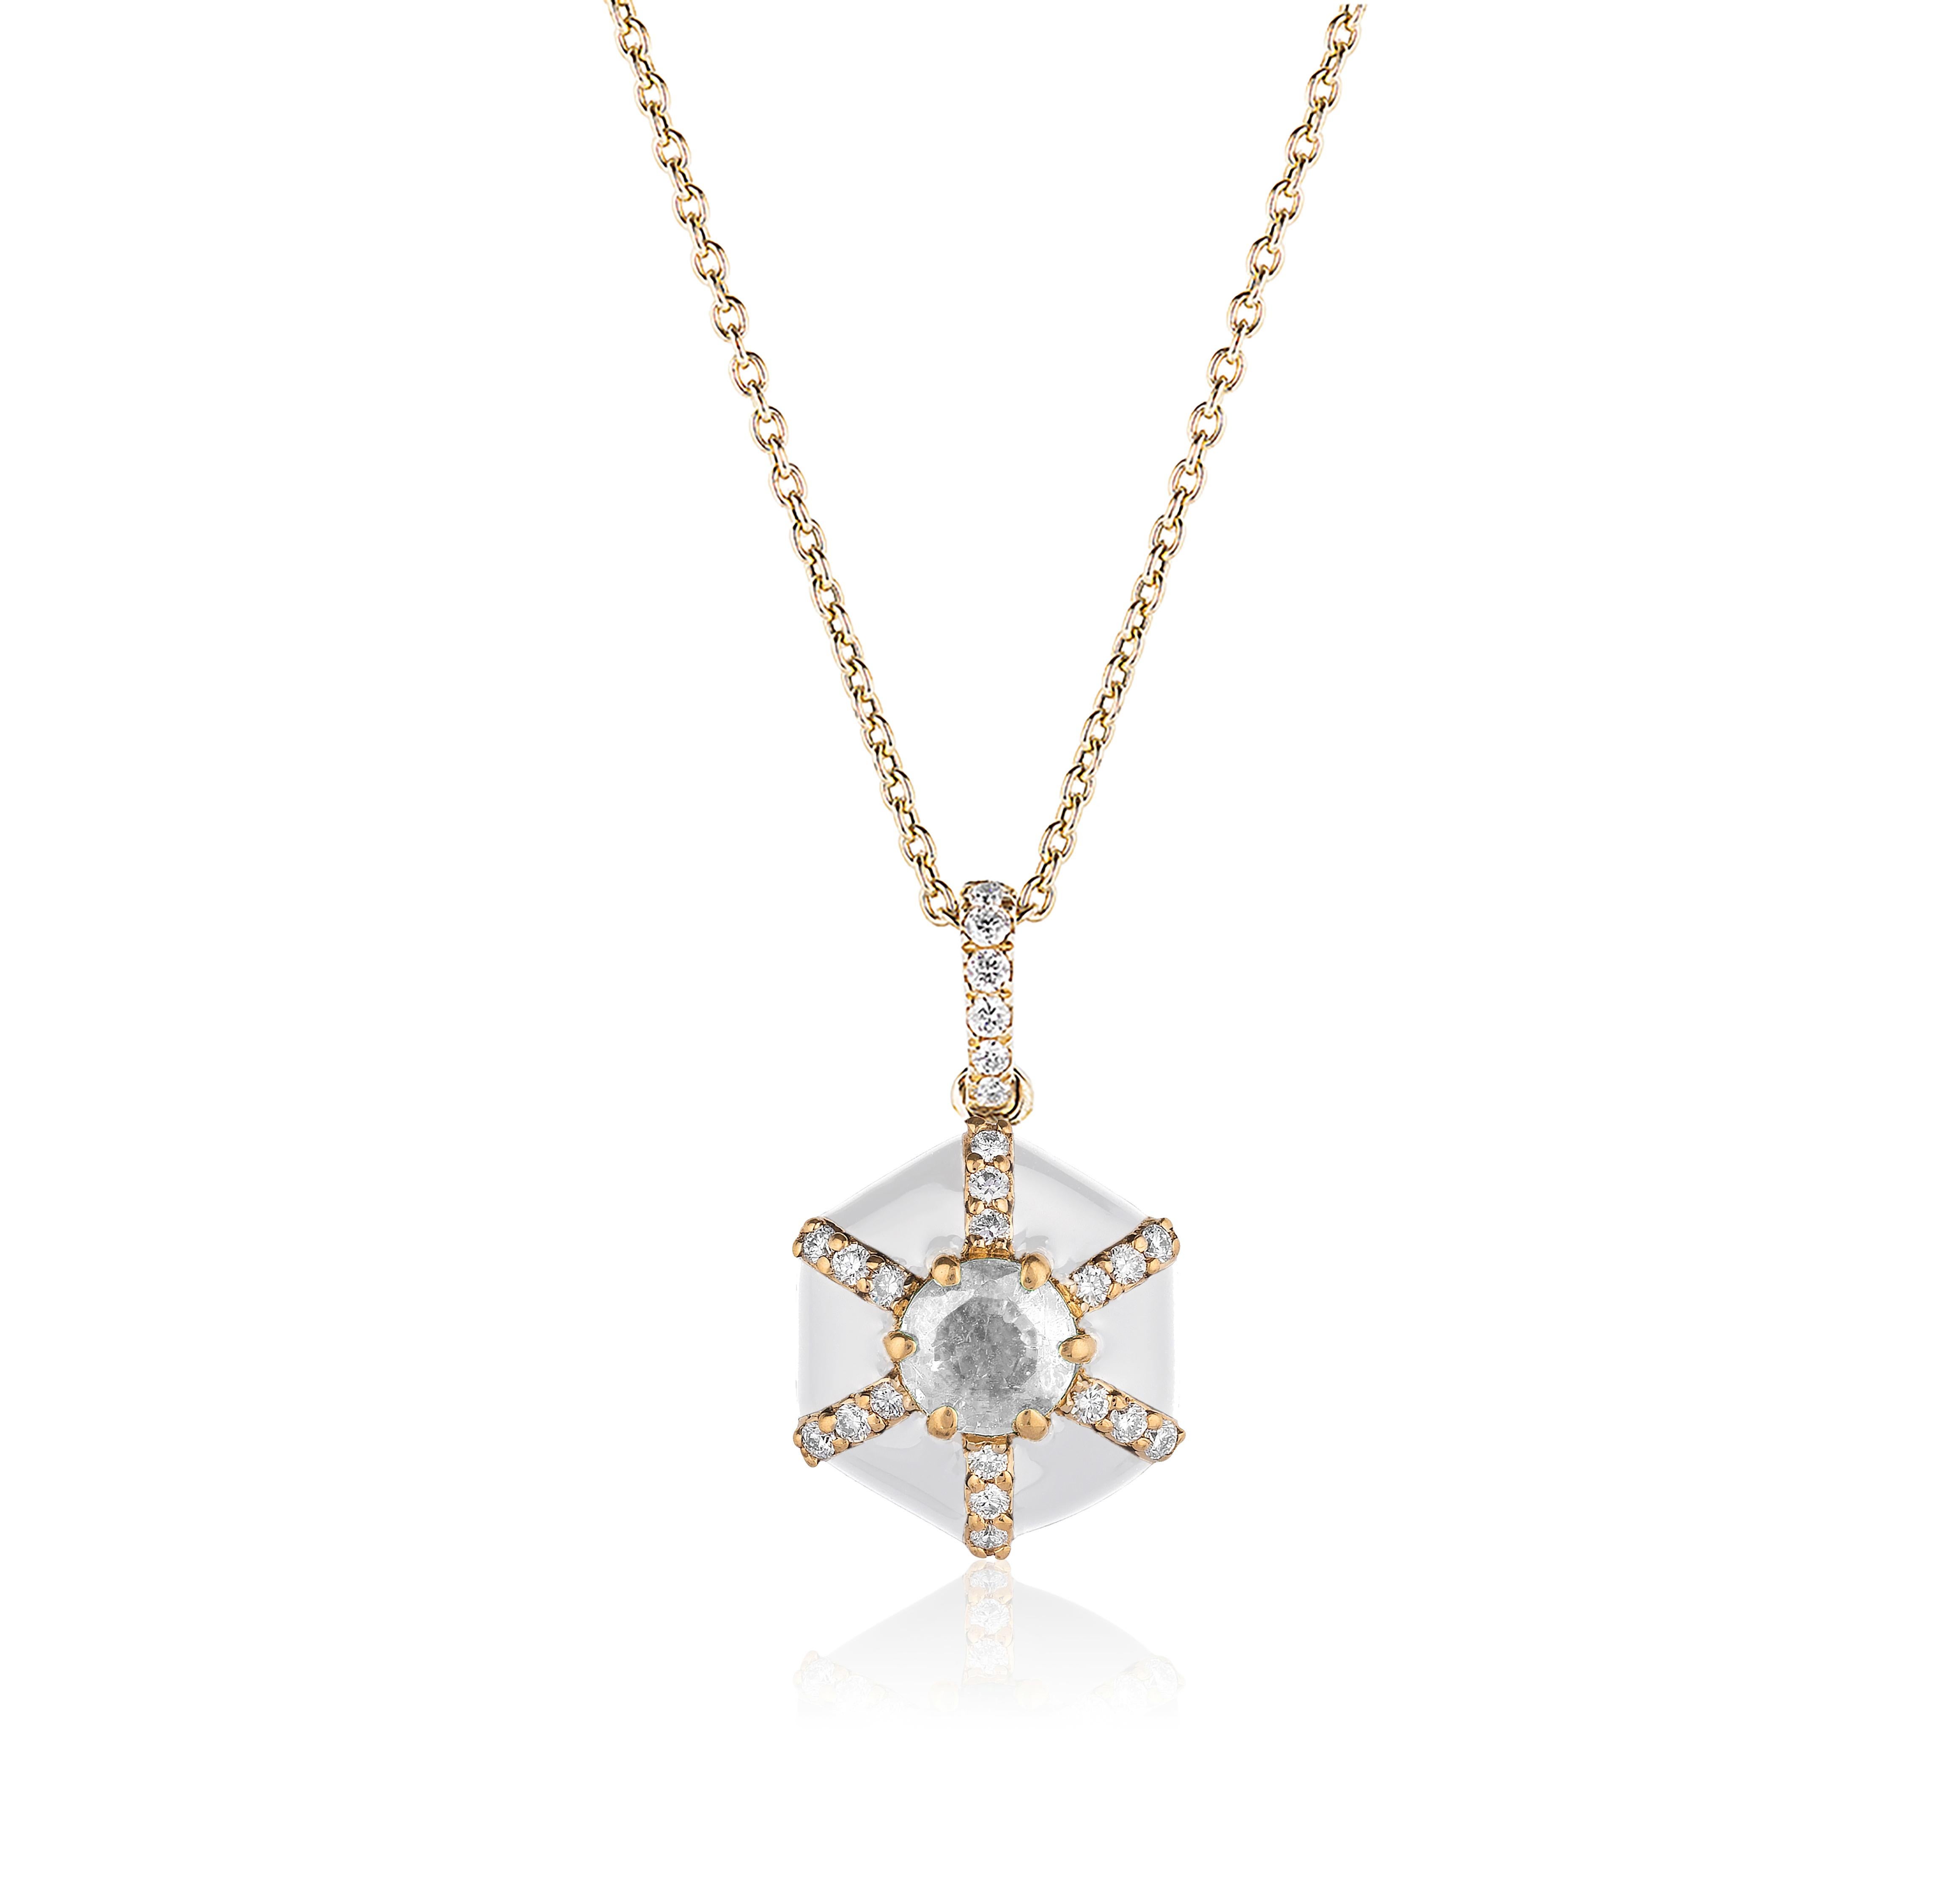 Hexagon White Enamel Pendant with  Diamonds in 18K Yellow Gold. from ‘Queen’ Collection

Stone Size: 4 mm

Diamonds: G-H / VS, Approx. Wt: 0.10 Carats 